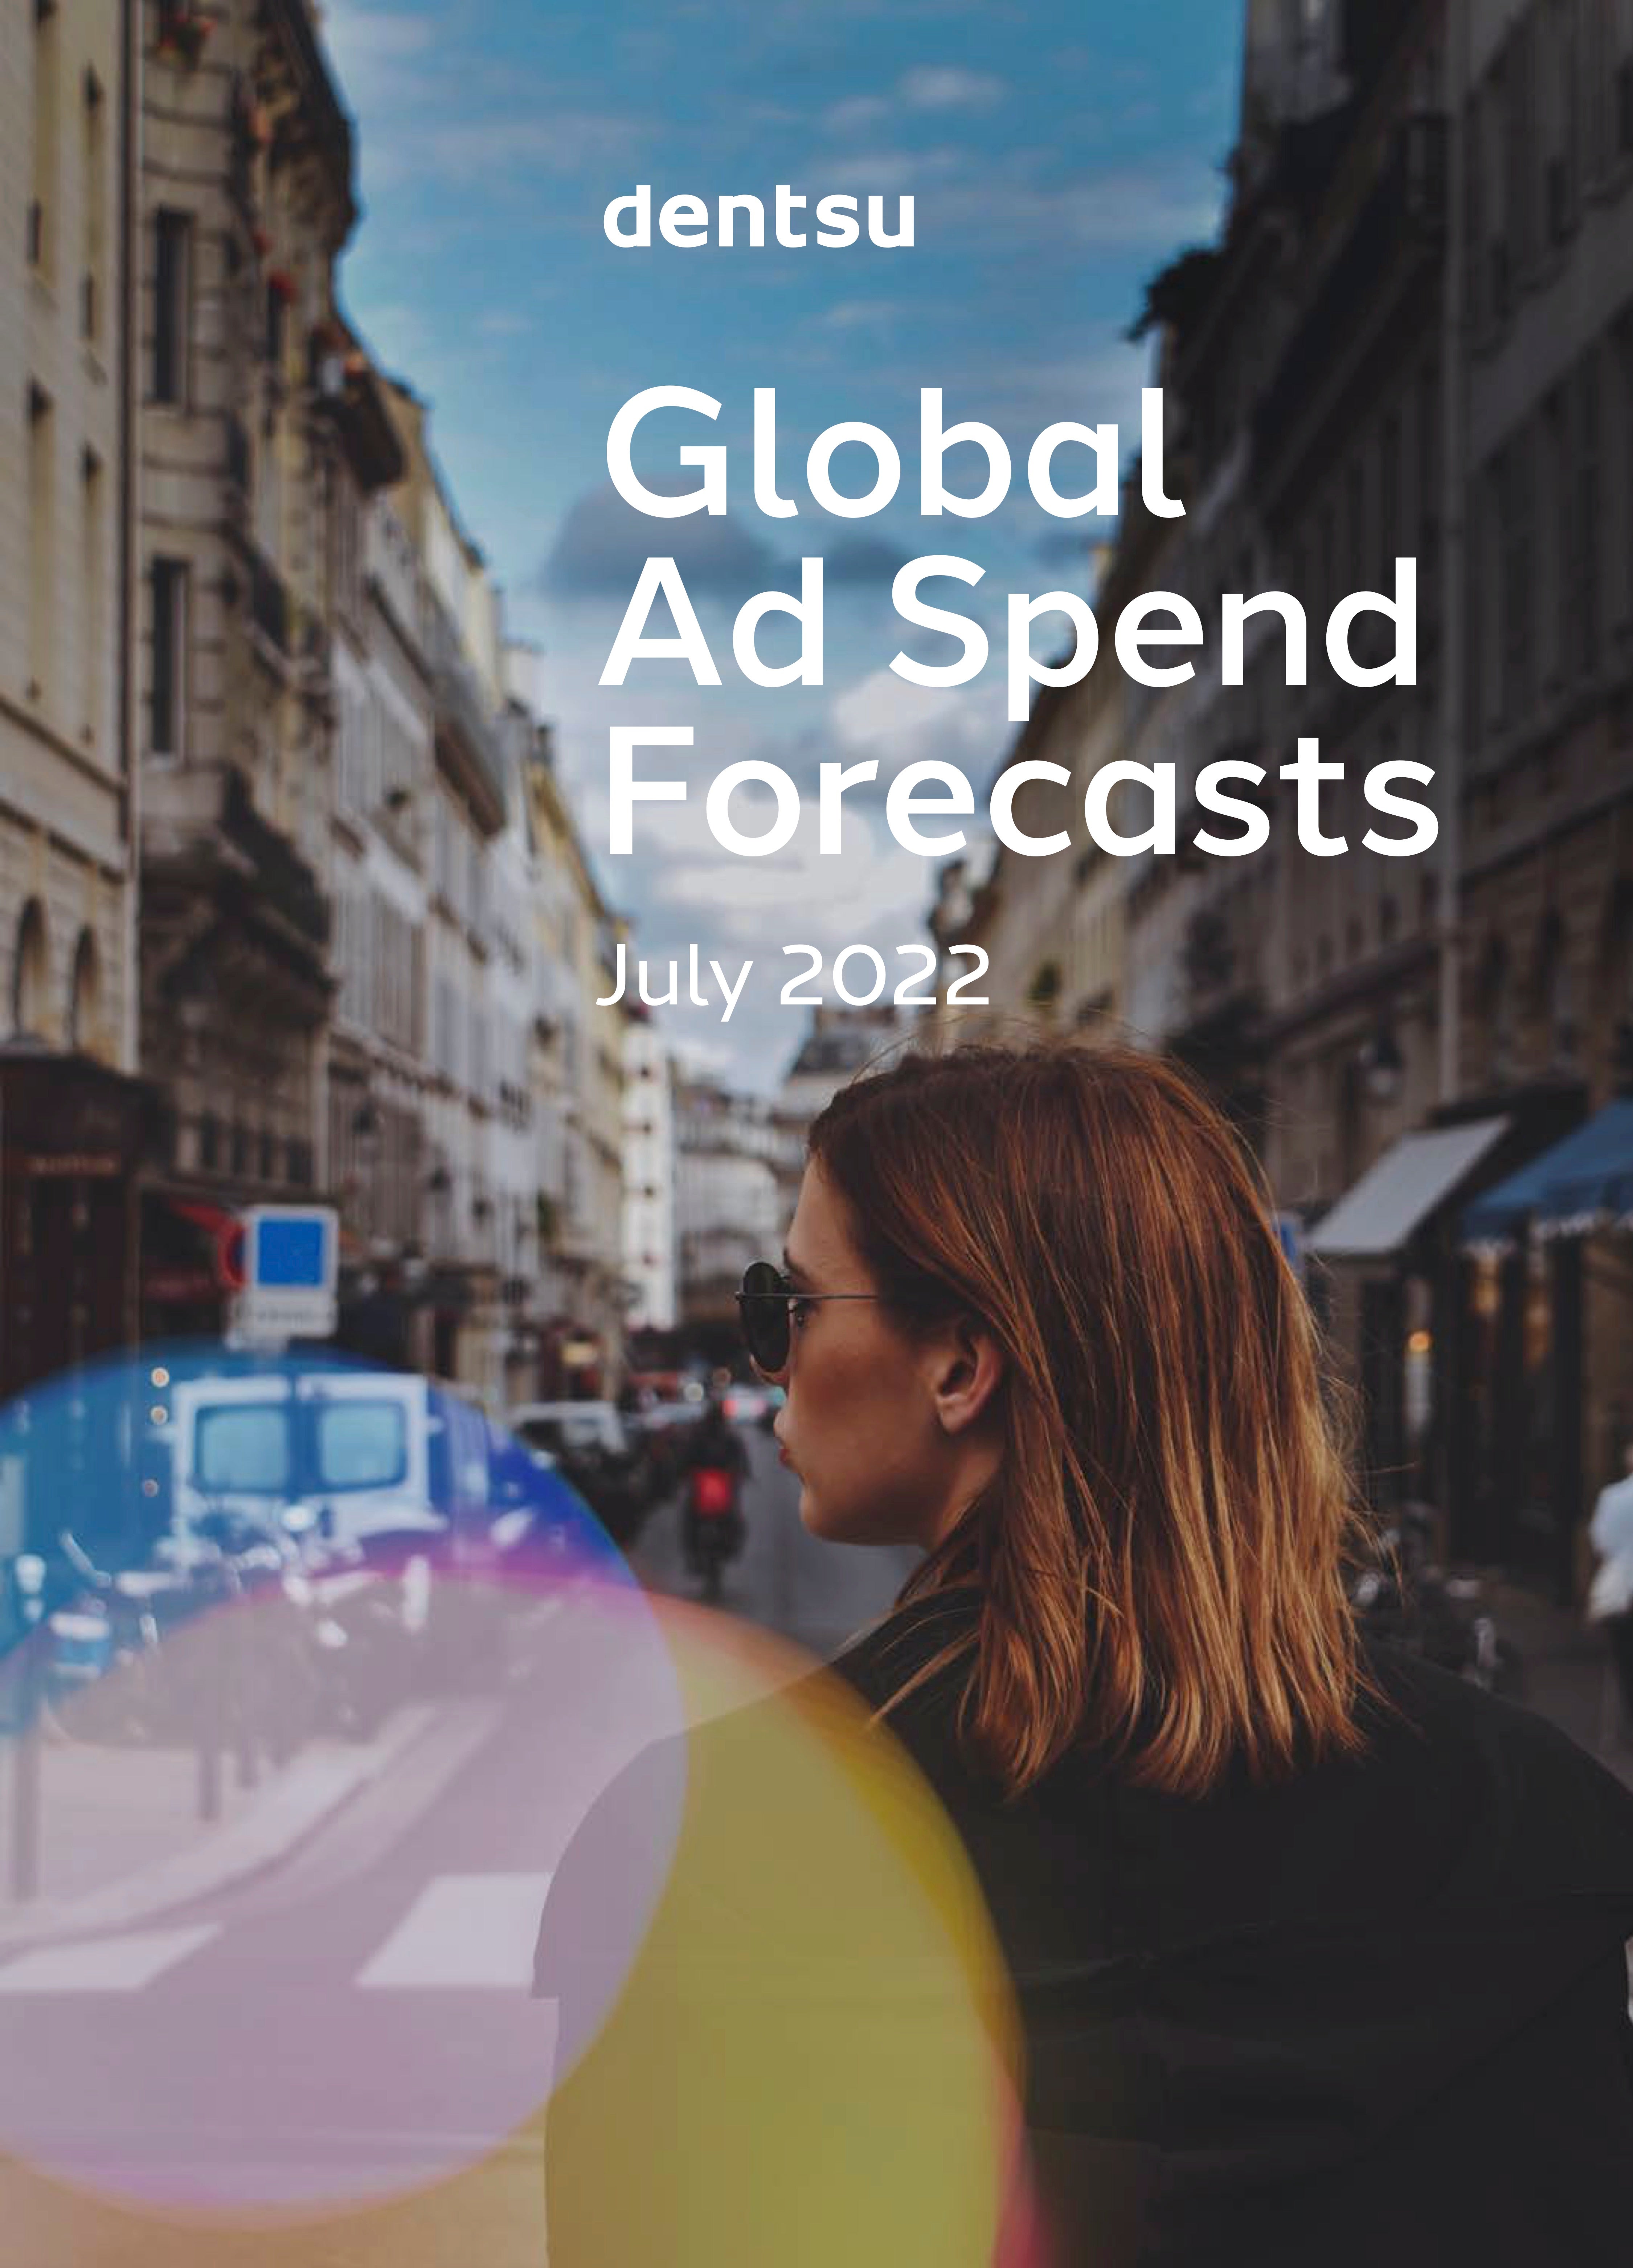 Global Ad Spend Forecast July 2022